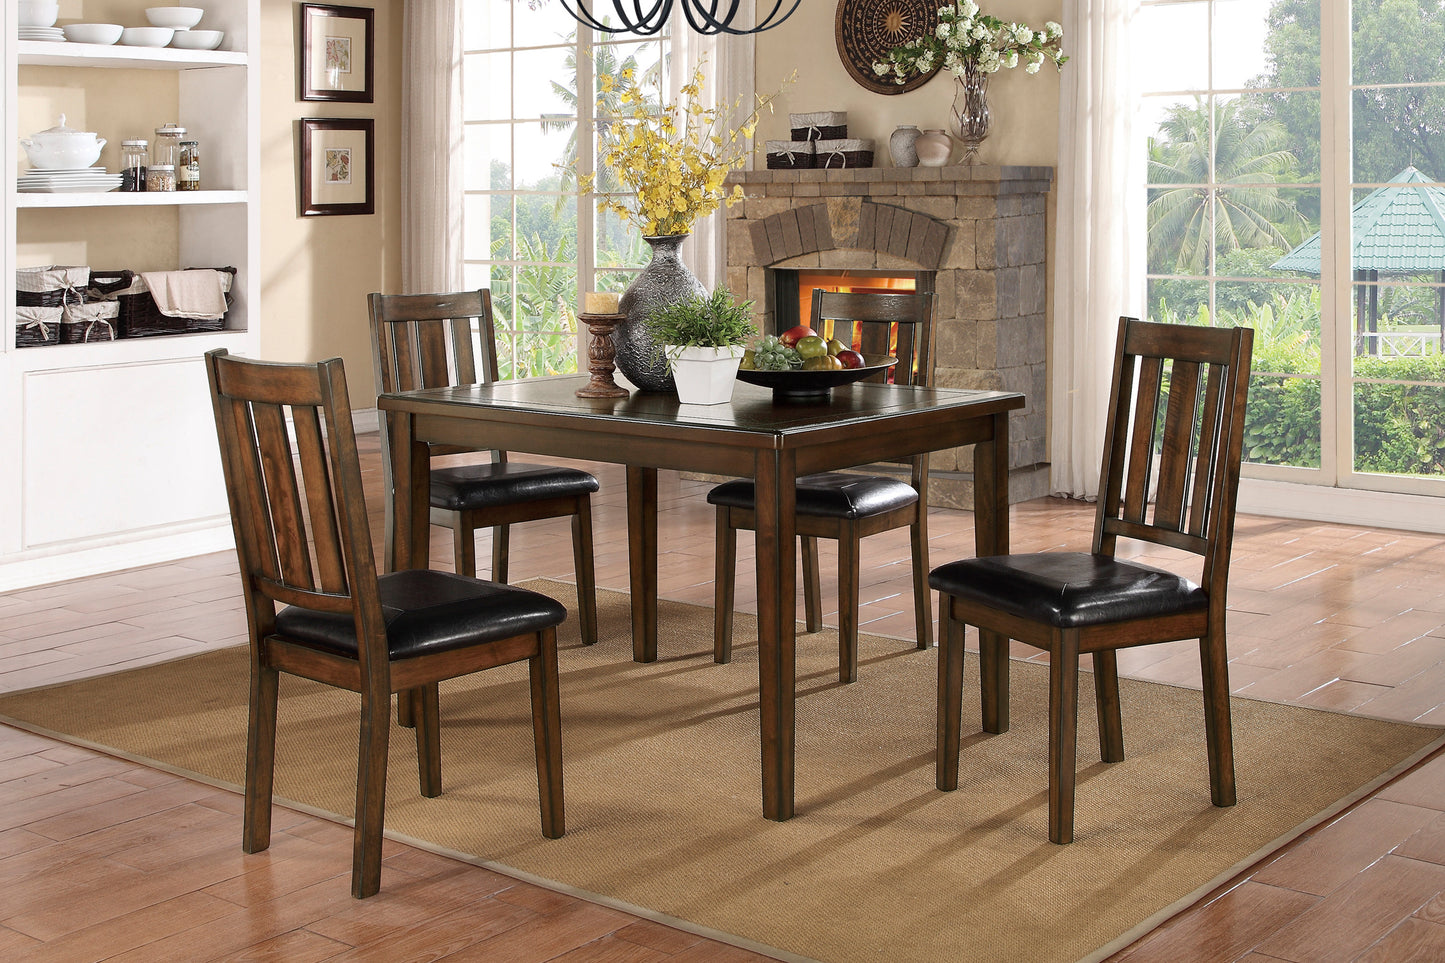 Mosely 5PC Dining Set - Table & 4 Chairs BROWN only